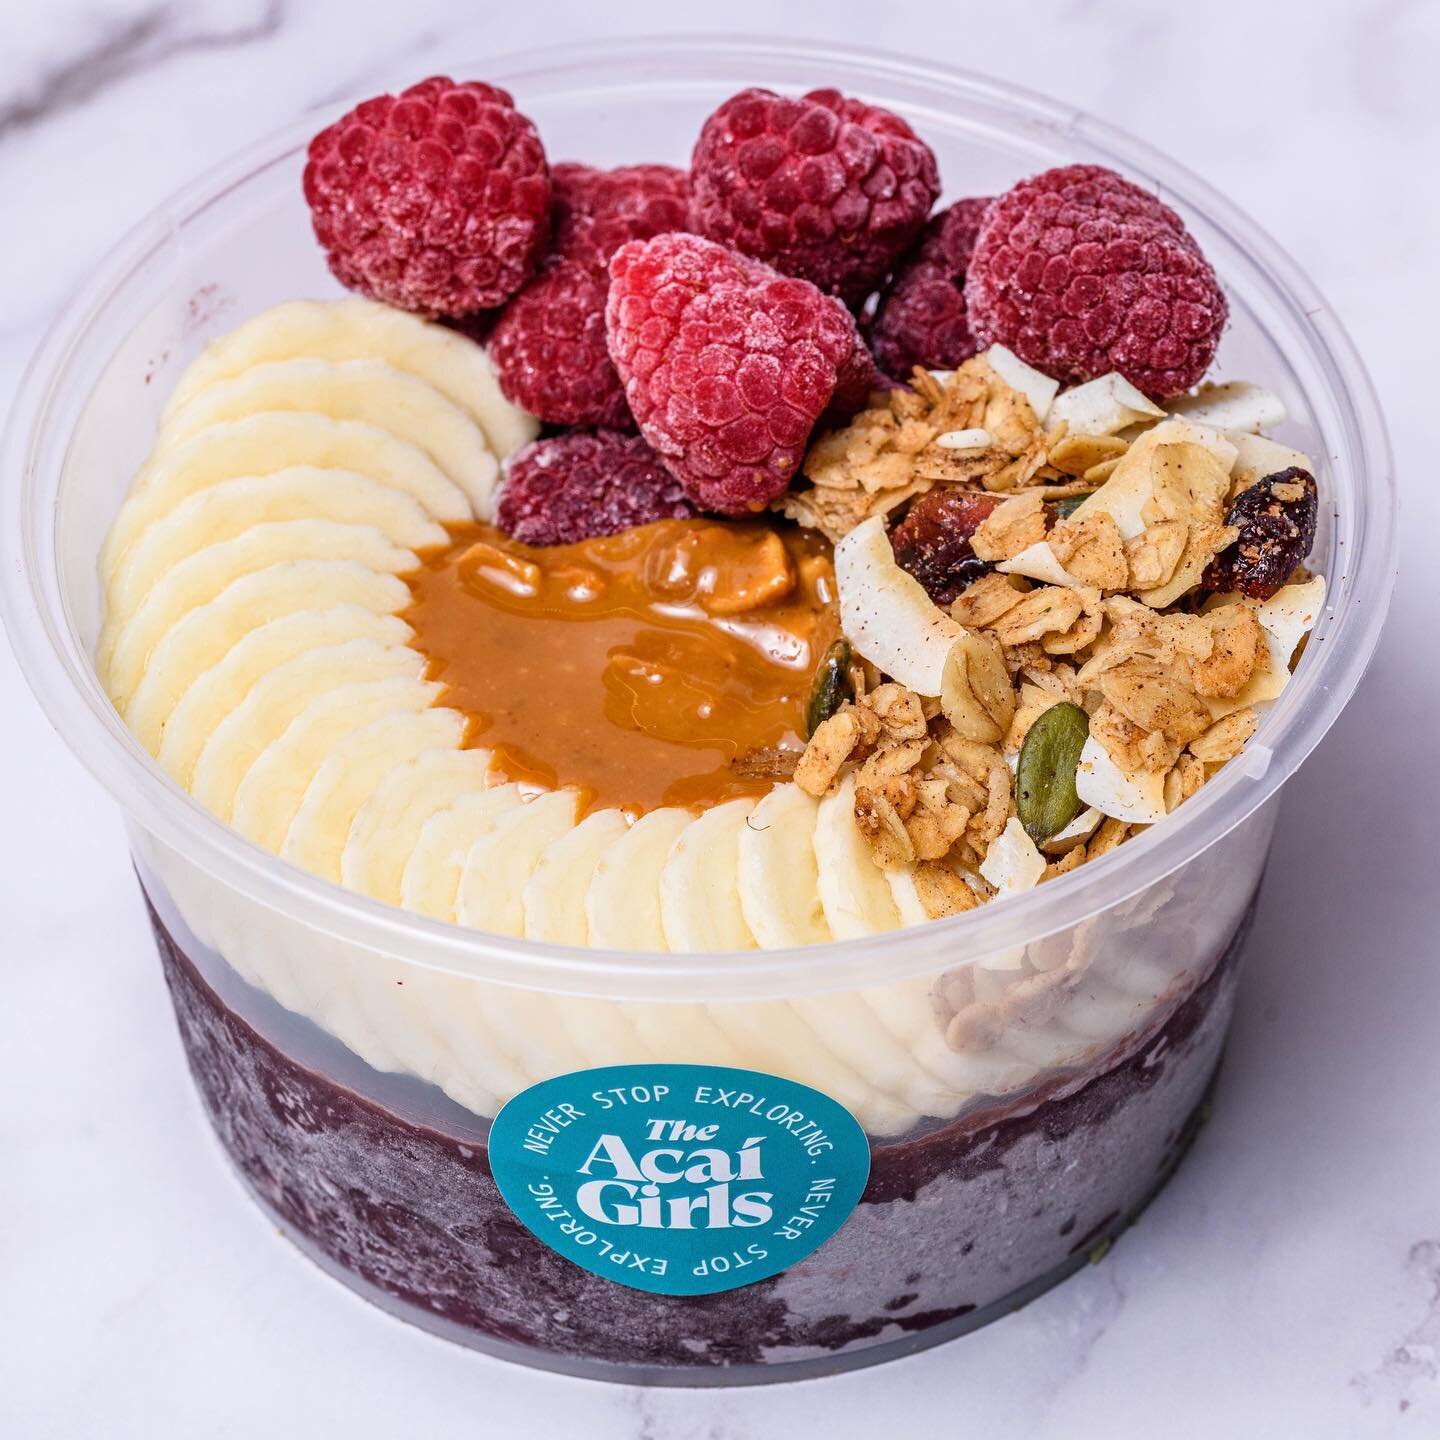 Catch us tomorrow serving our A&ccedil;ai bowls all day at Soho House Festival! If you are there come down and say hi! 💕